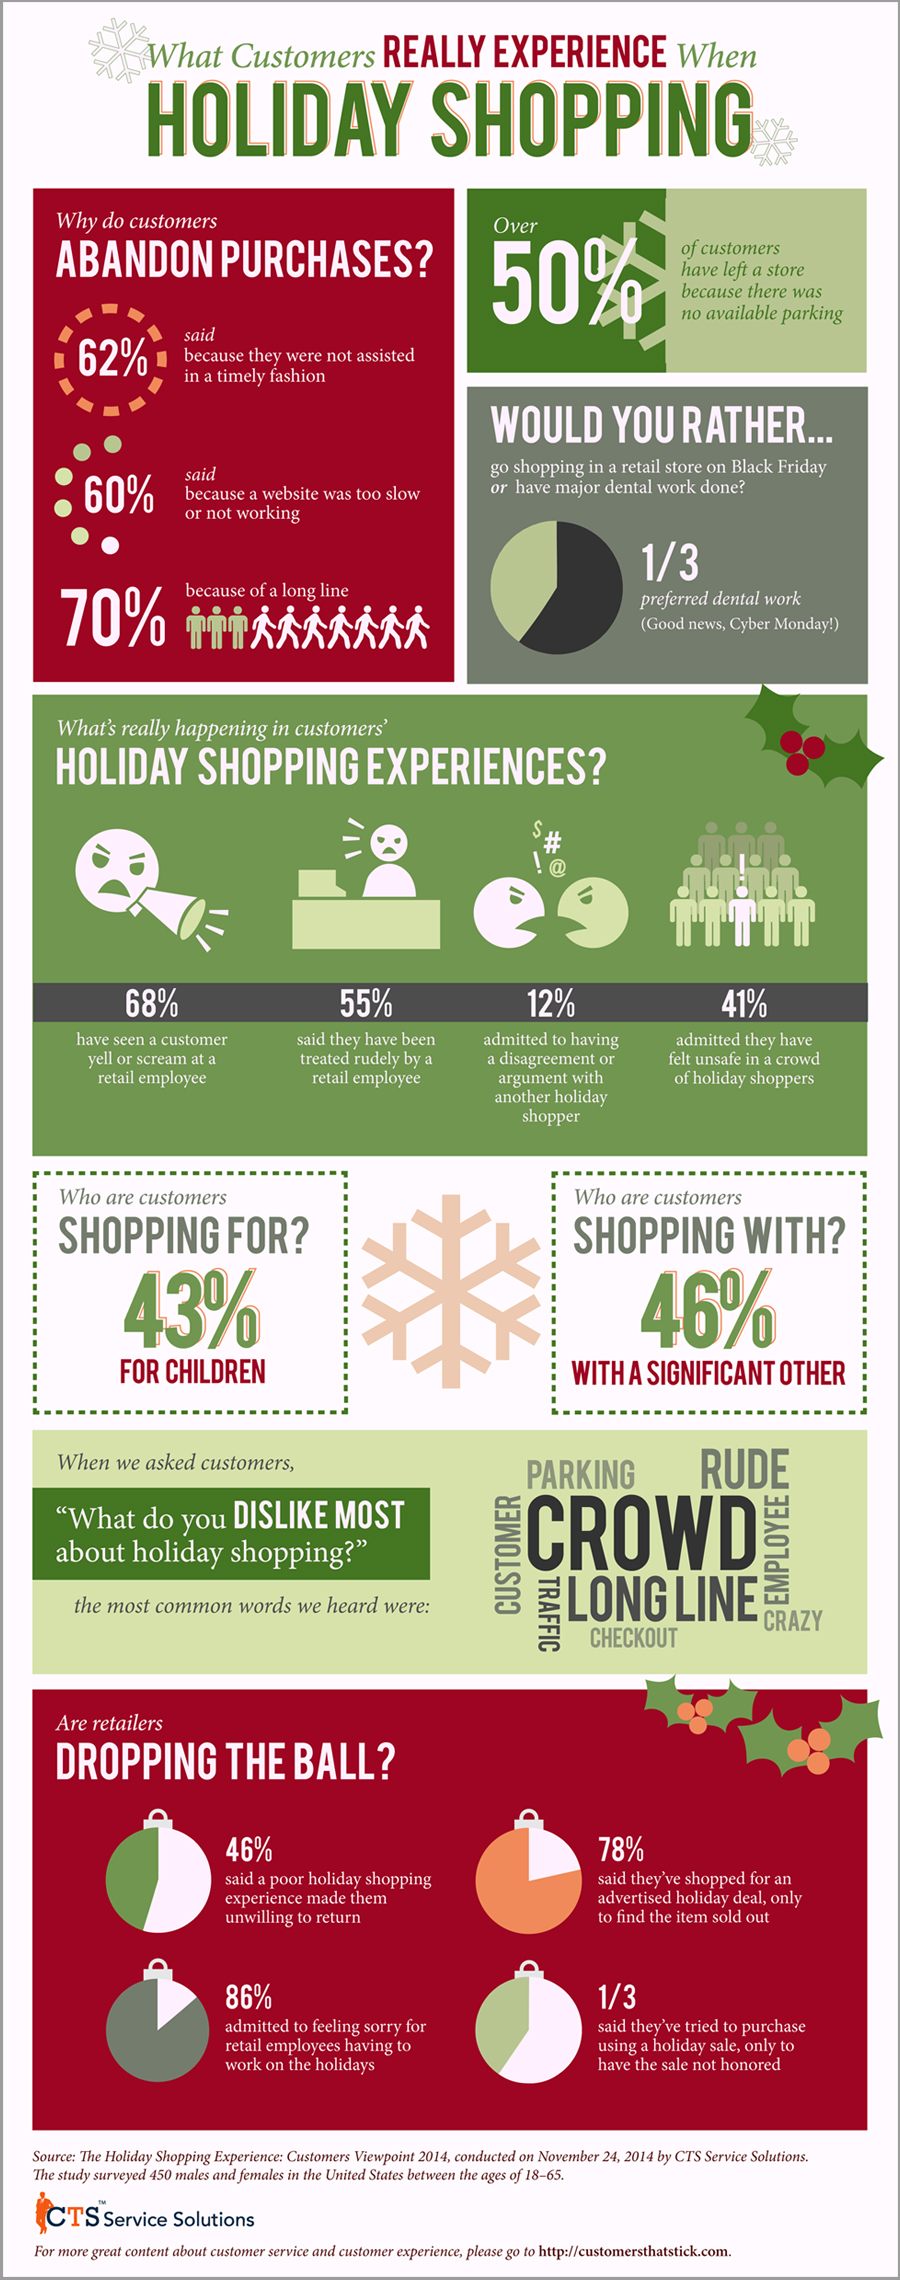 Consumer Holiday Shopping Experiences Infographic from Customers That Stick